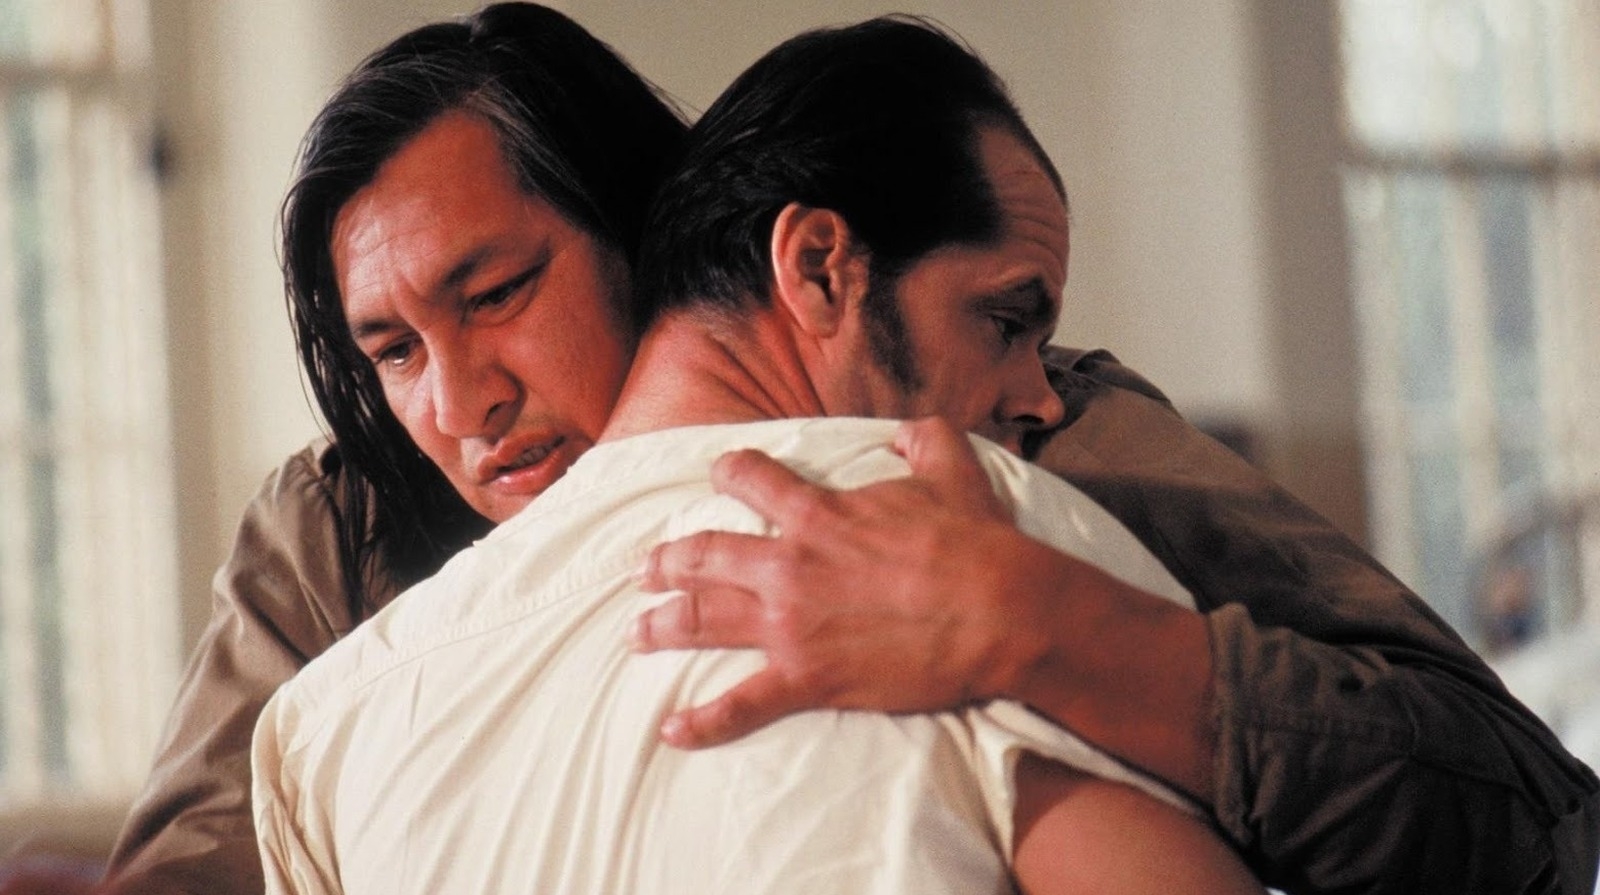 Two men embracing, one comforting the other, in a scene from a film